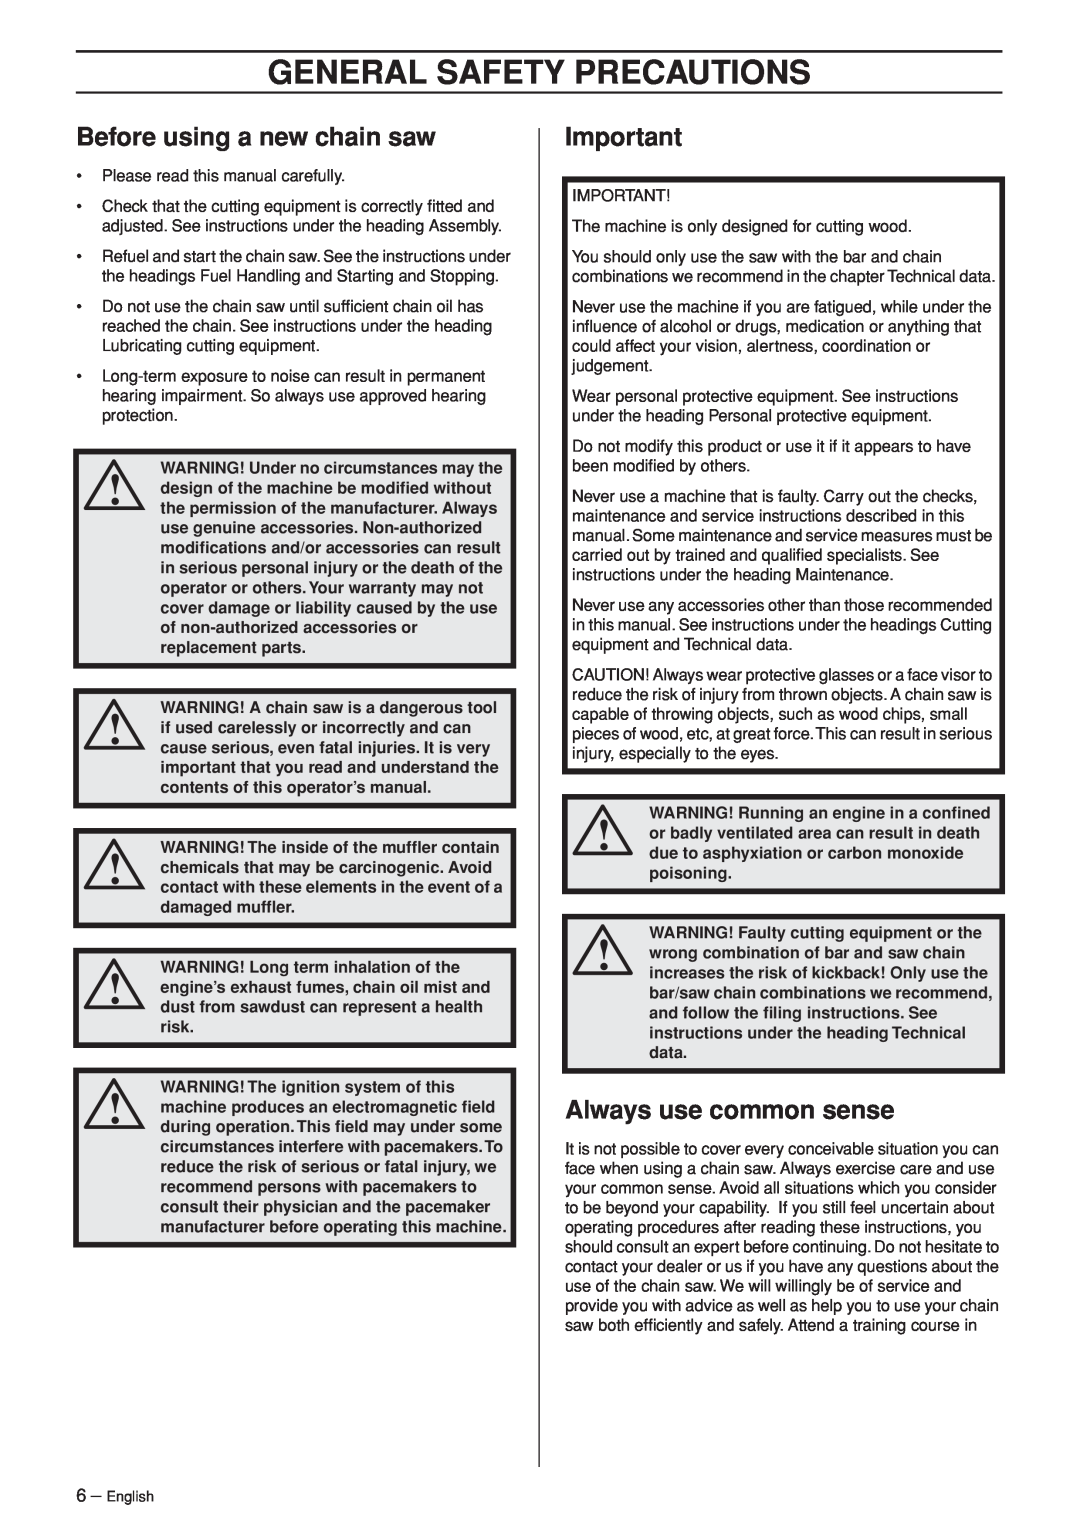 Jonsered CS 2153 manual General Safety Precautions, Before using a new chain saw, Always use common sense 